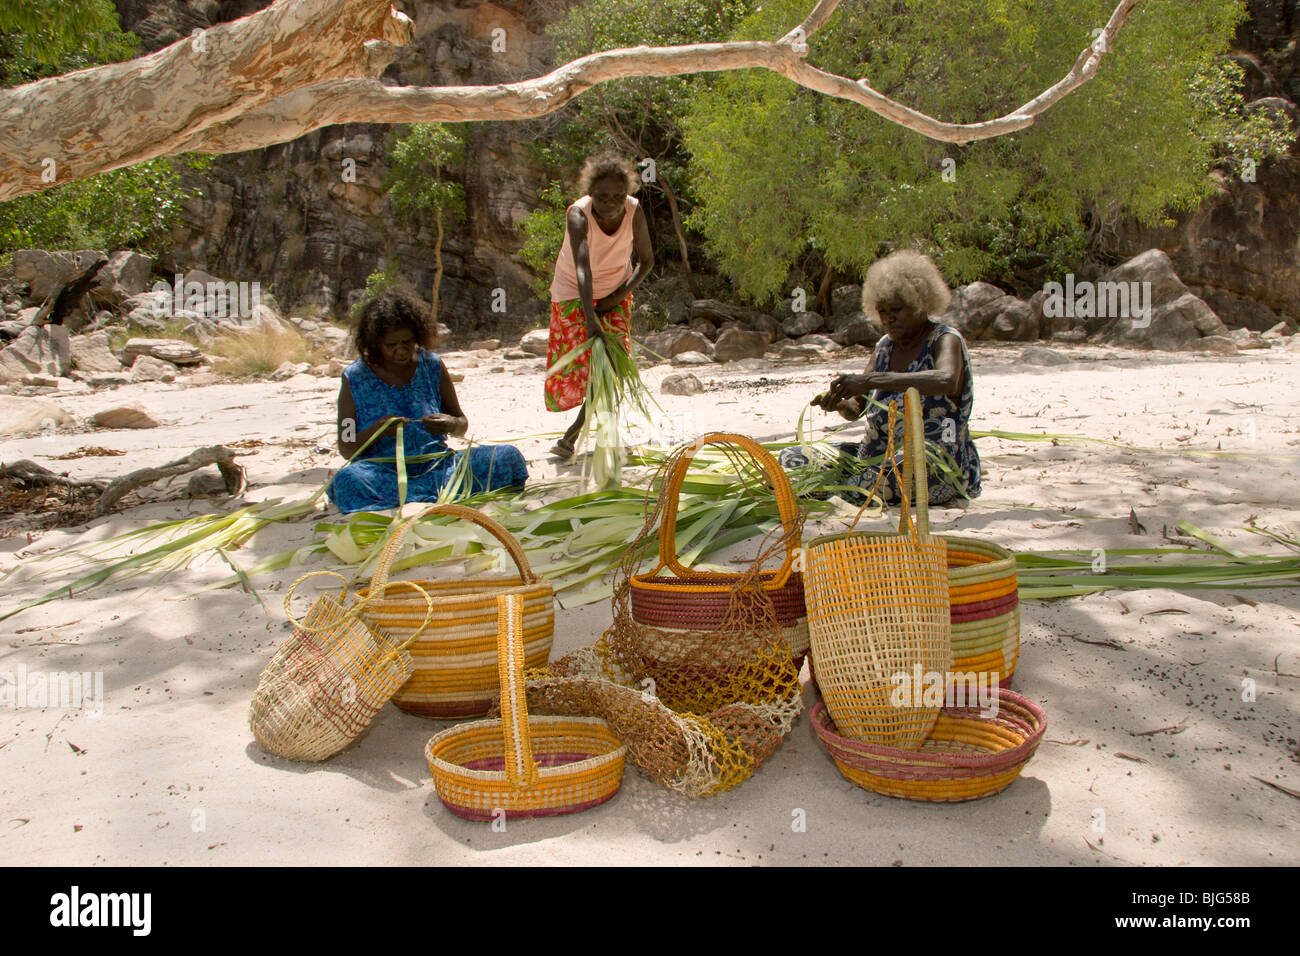 Aboriginal craftswomen in dry creekbed splitting pandanus to dry dye and weave baskets & dilly-bags for sale at Injalak Stock Photo